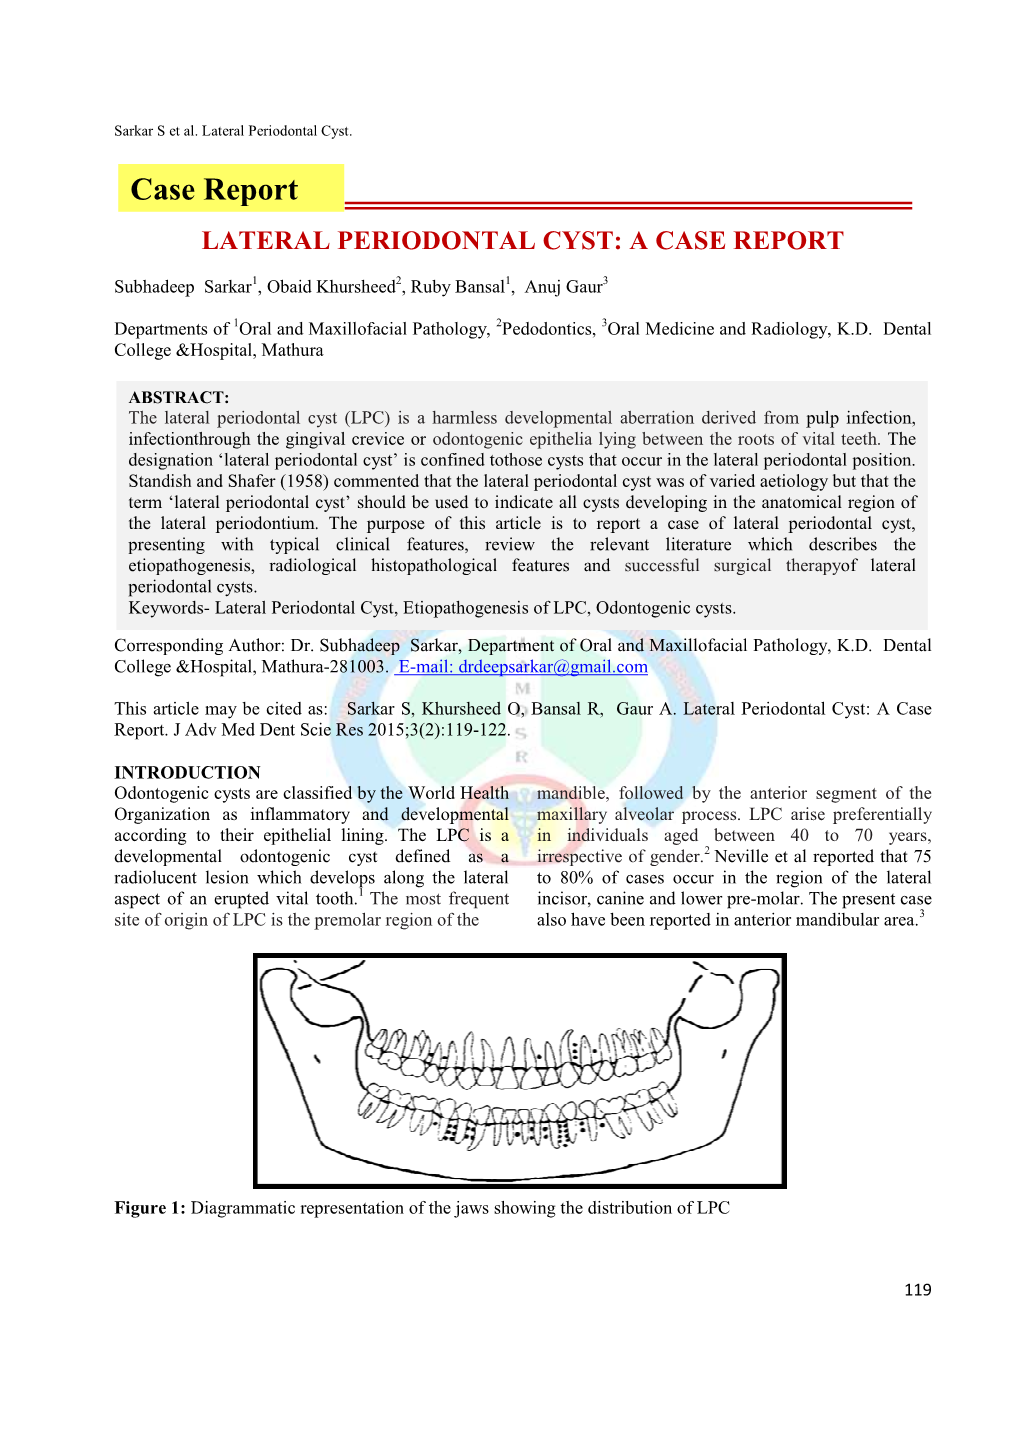 23. Lateral Periodontal Cyst- a Case Report